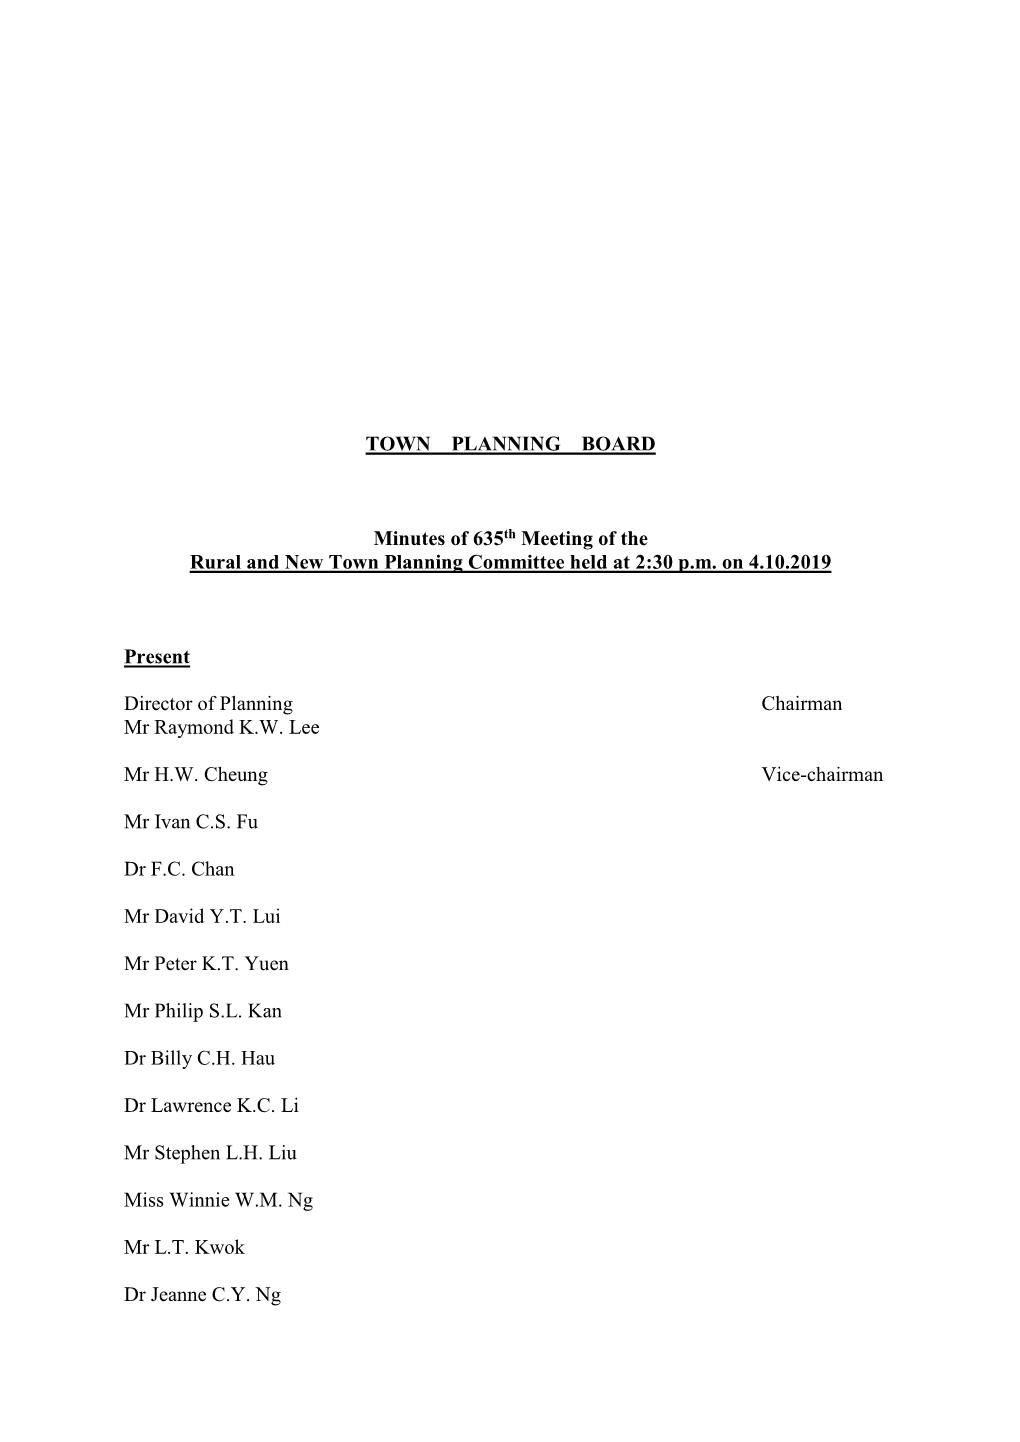 Minutes of 635Th Meeting of the Rural and New Town Planning Committee Held at 2:30 P.M. on 4.10.2019